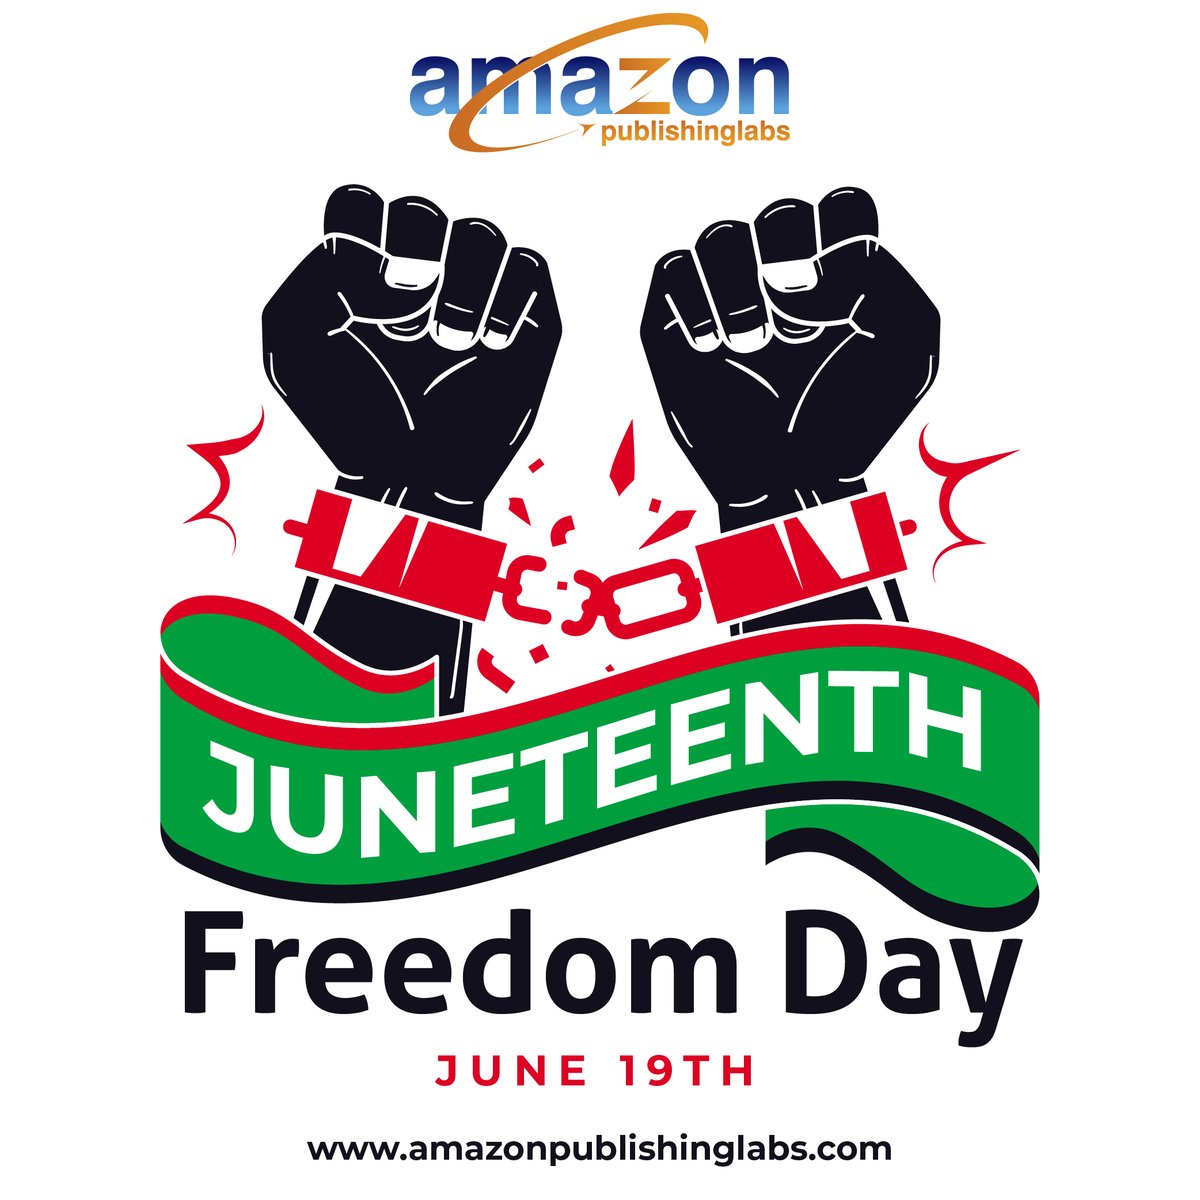 Remembering our history, celebrating our progress, and uniting for a better tomorrow on Juneteenth.

Contact us now:
amazonpublishinglabs.com

#amazonpublishinglabs #ebookwriting #bookwriting #Juneteenth #FreedomDay #EmancipationCelebration #LiberationDay #BlackFreedom